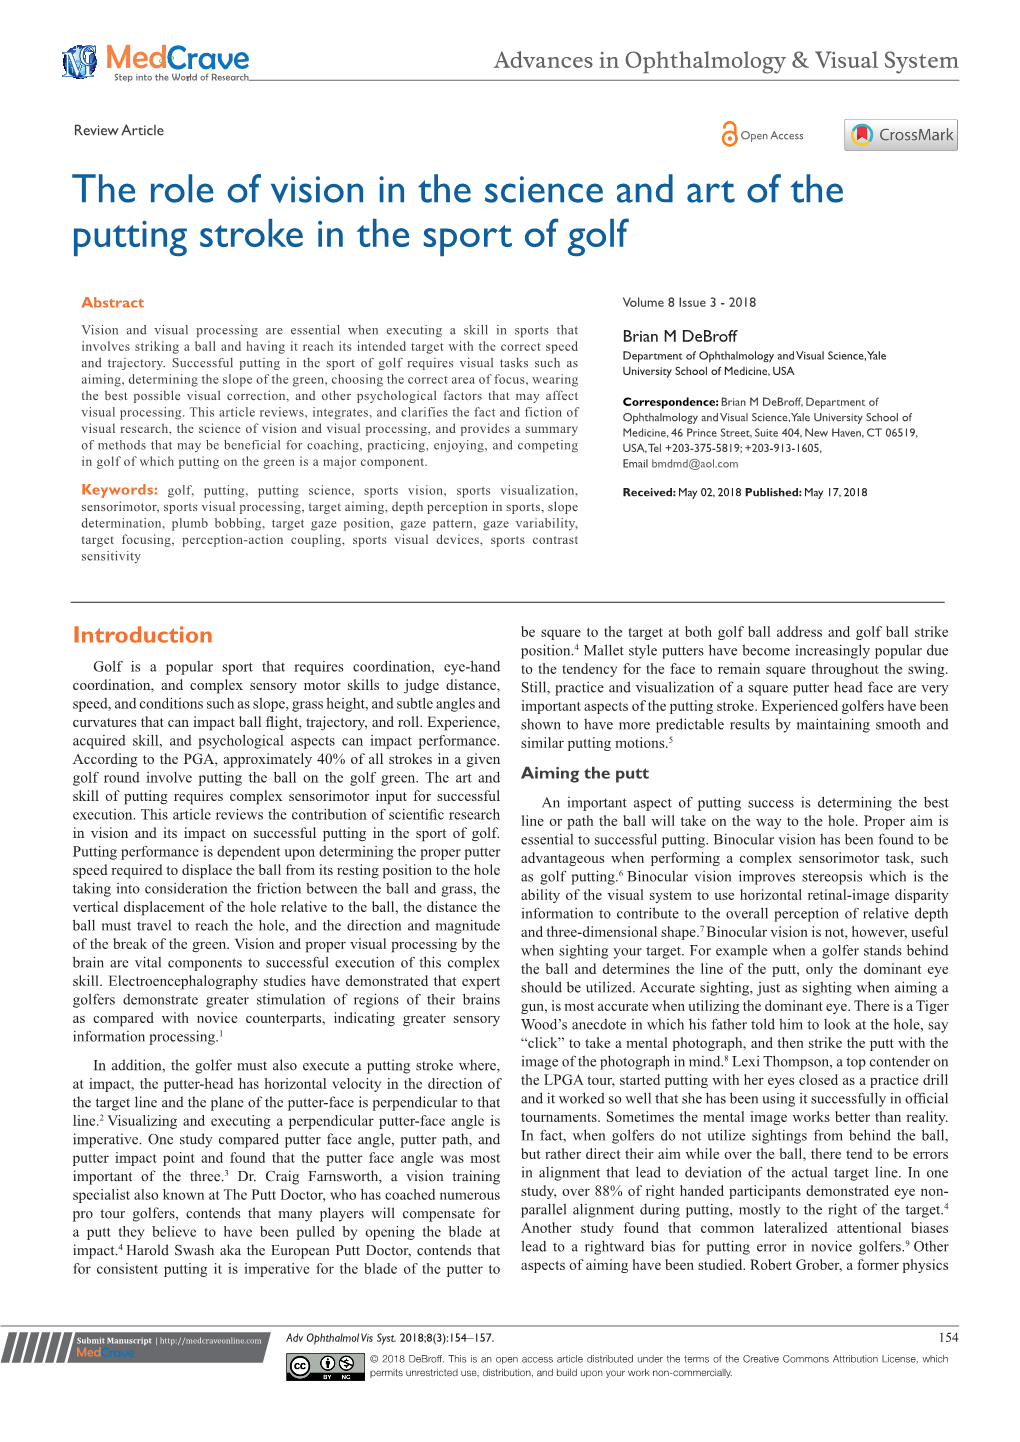 The Role of Vision in the Science and Art of the Putting Stroke in the Sport of Golf